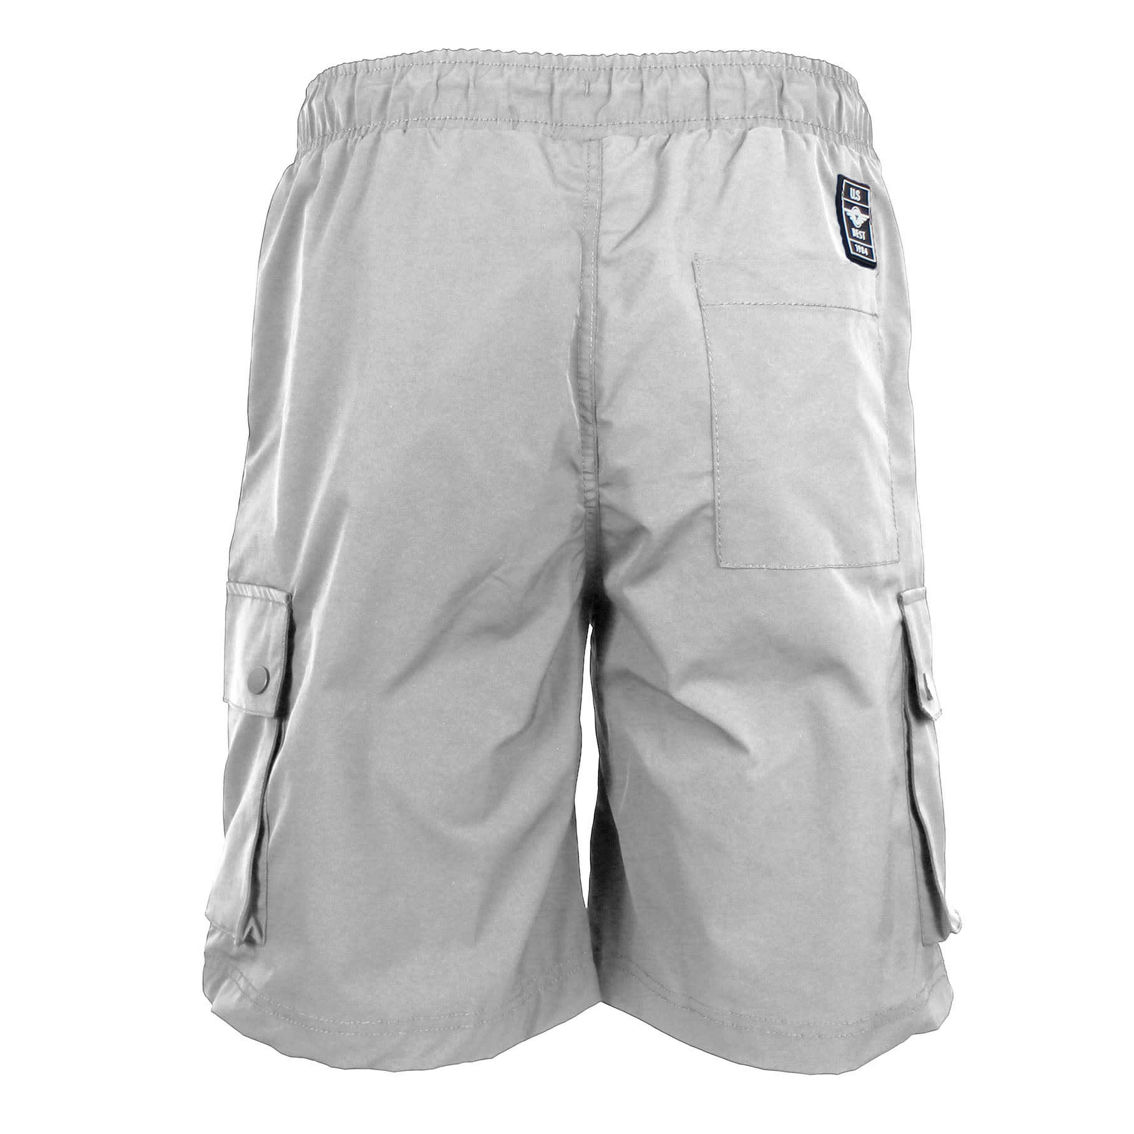 Men's Moisture Wicking Performance Quick Dry Cargo Shorts - Image 2 of 2